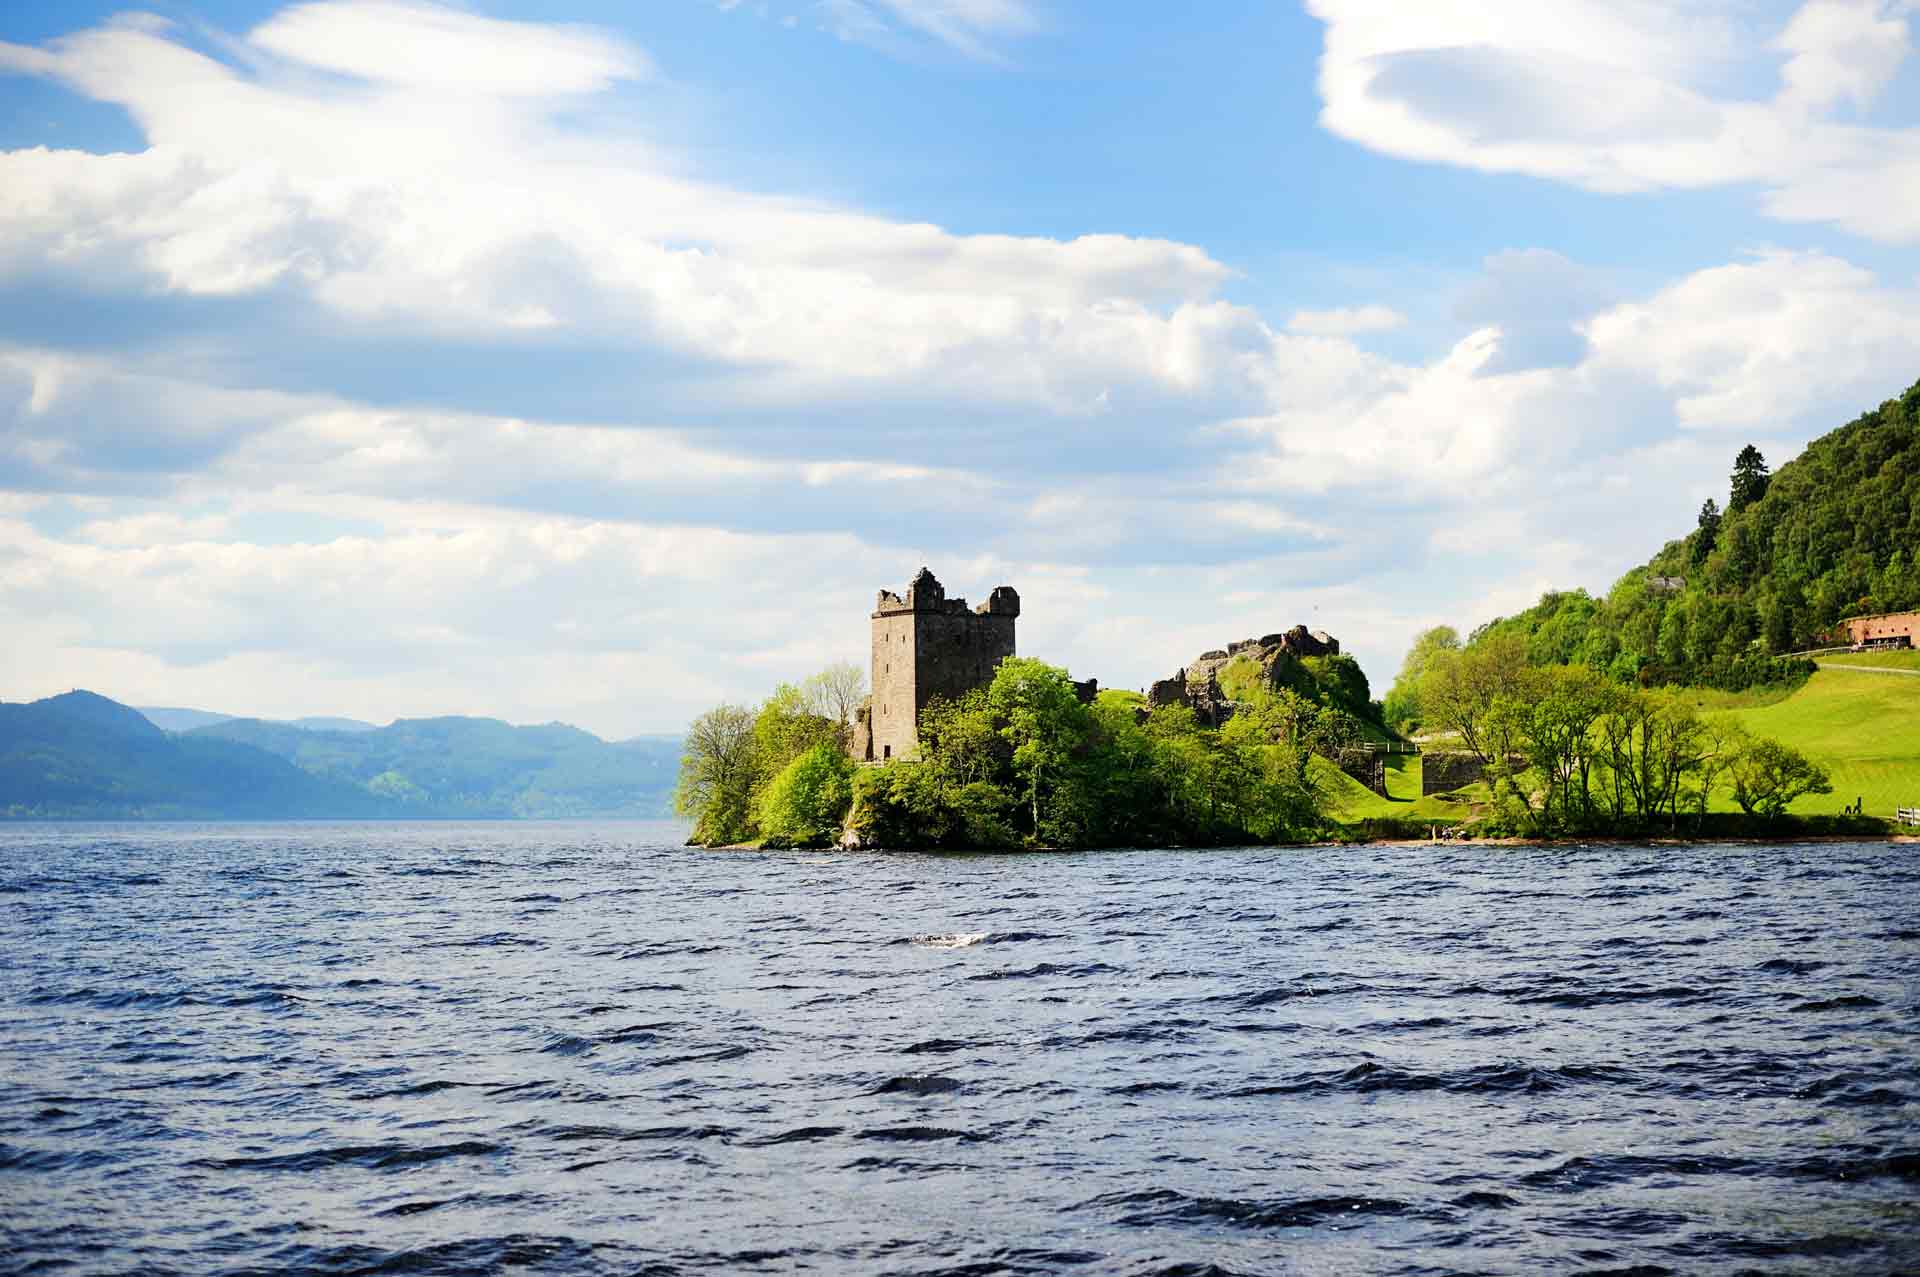 View of Urquhart Castle on the shores of Loch Ness